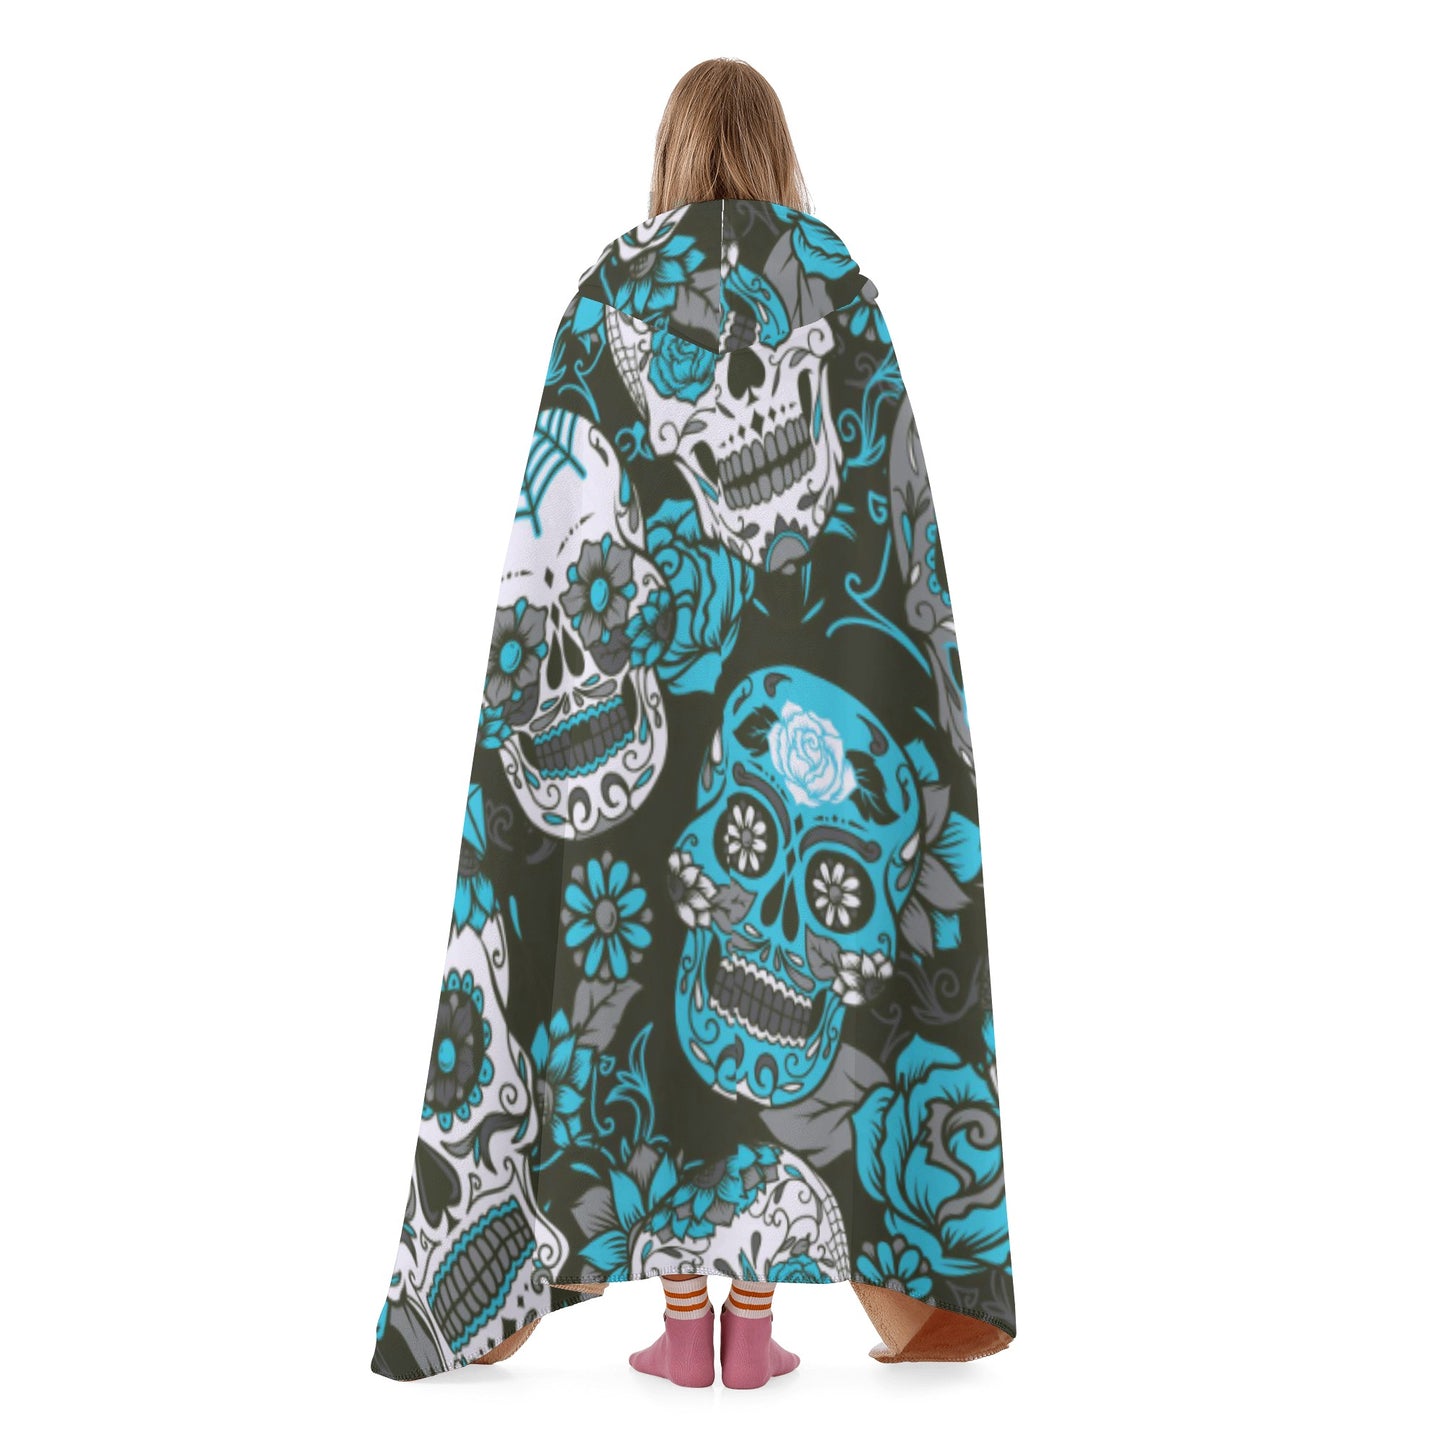 Day of the dead Halloween Hooded Blanket